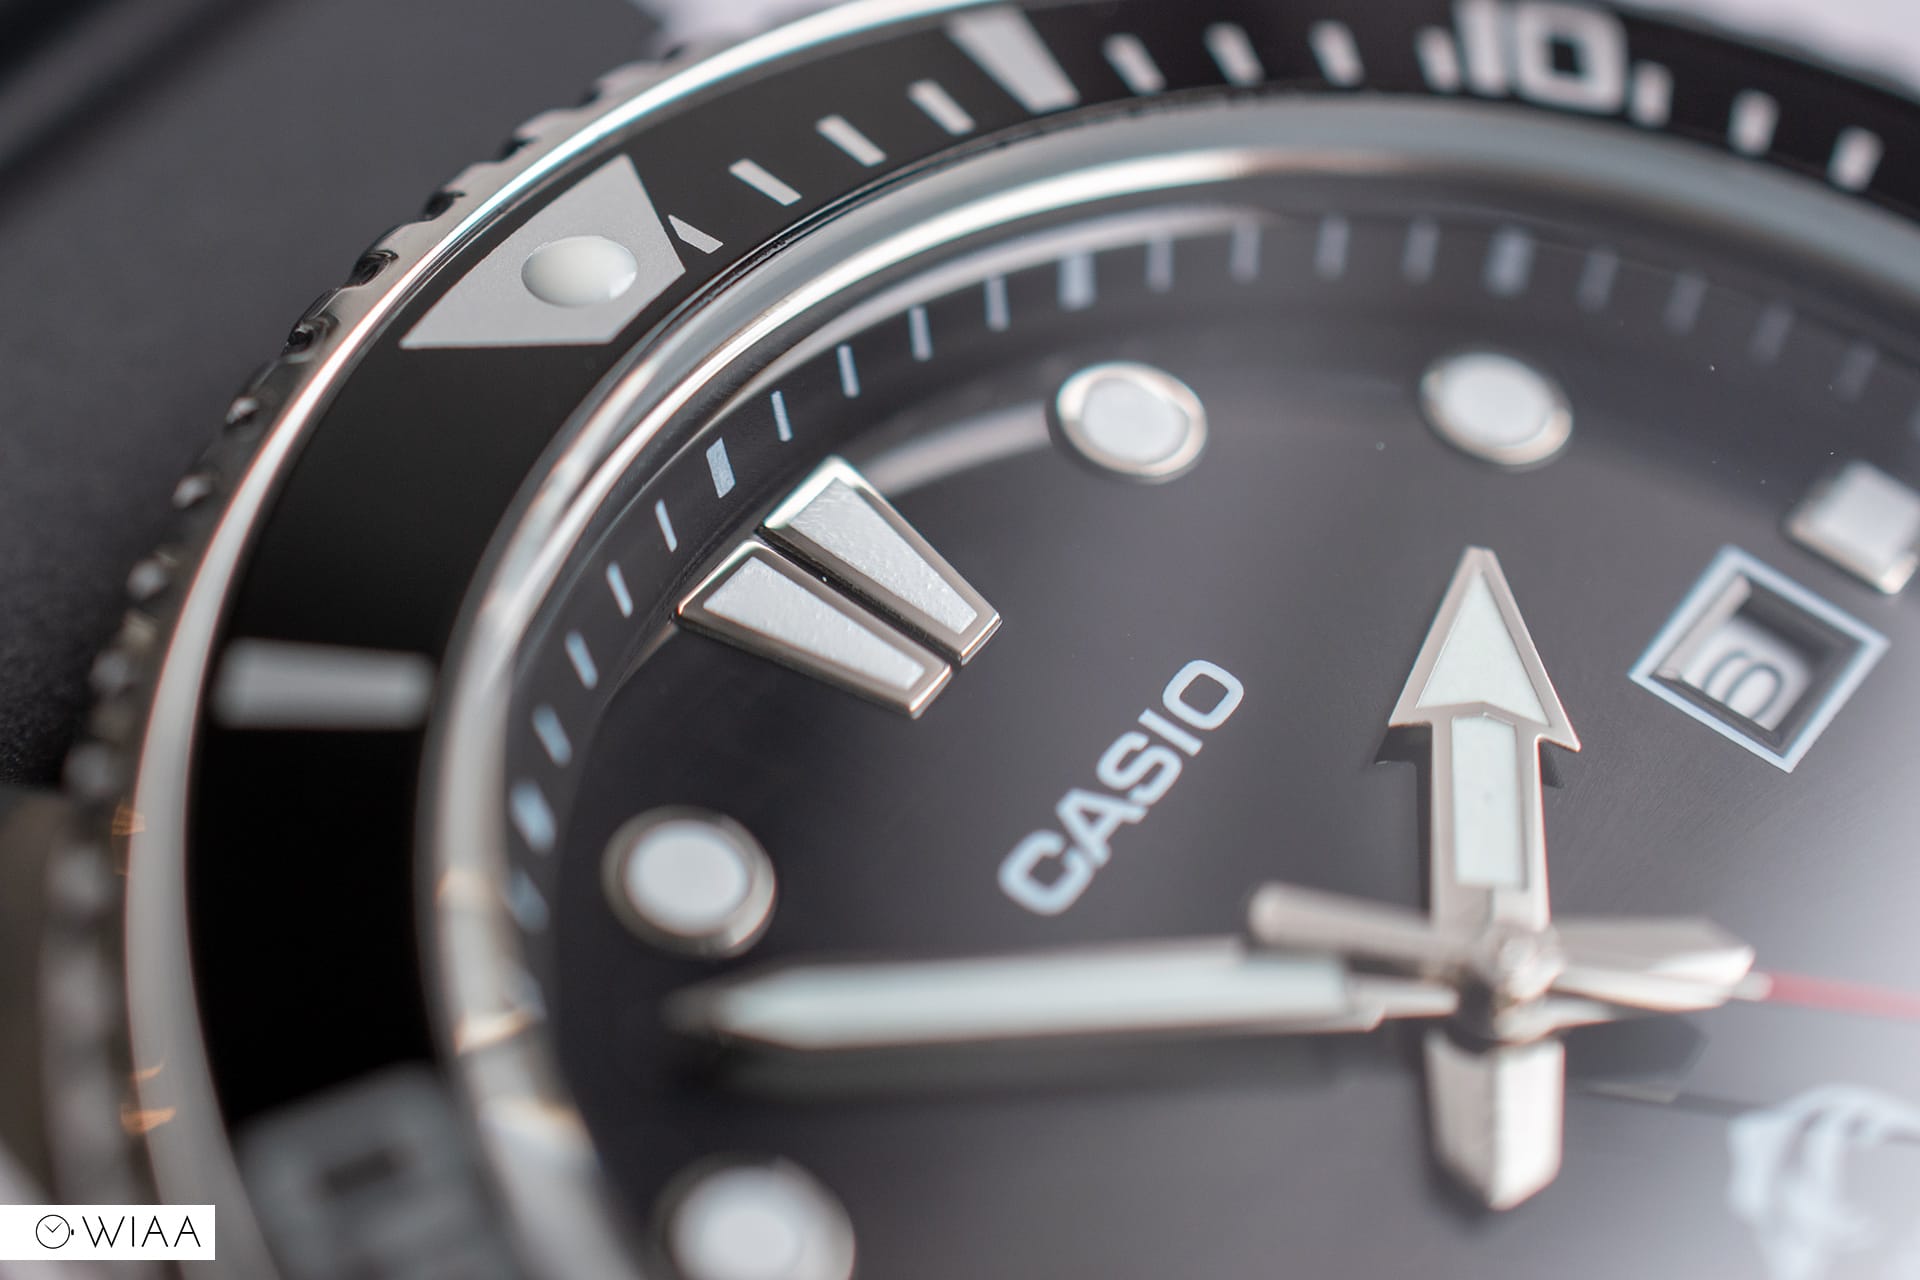 Casio Duro MDV-106 Watch Review - 12&60